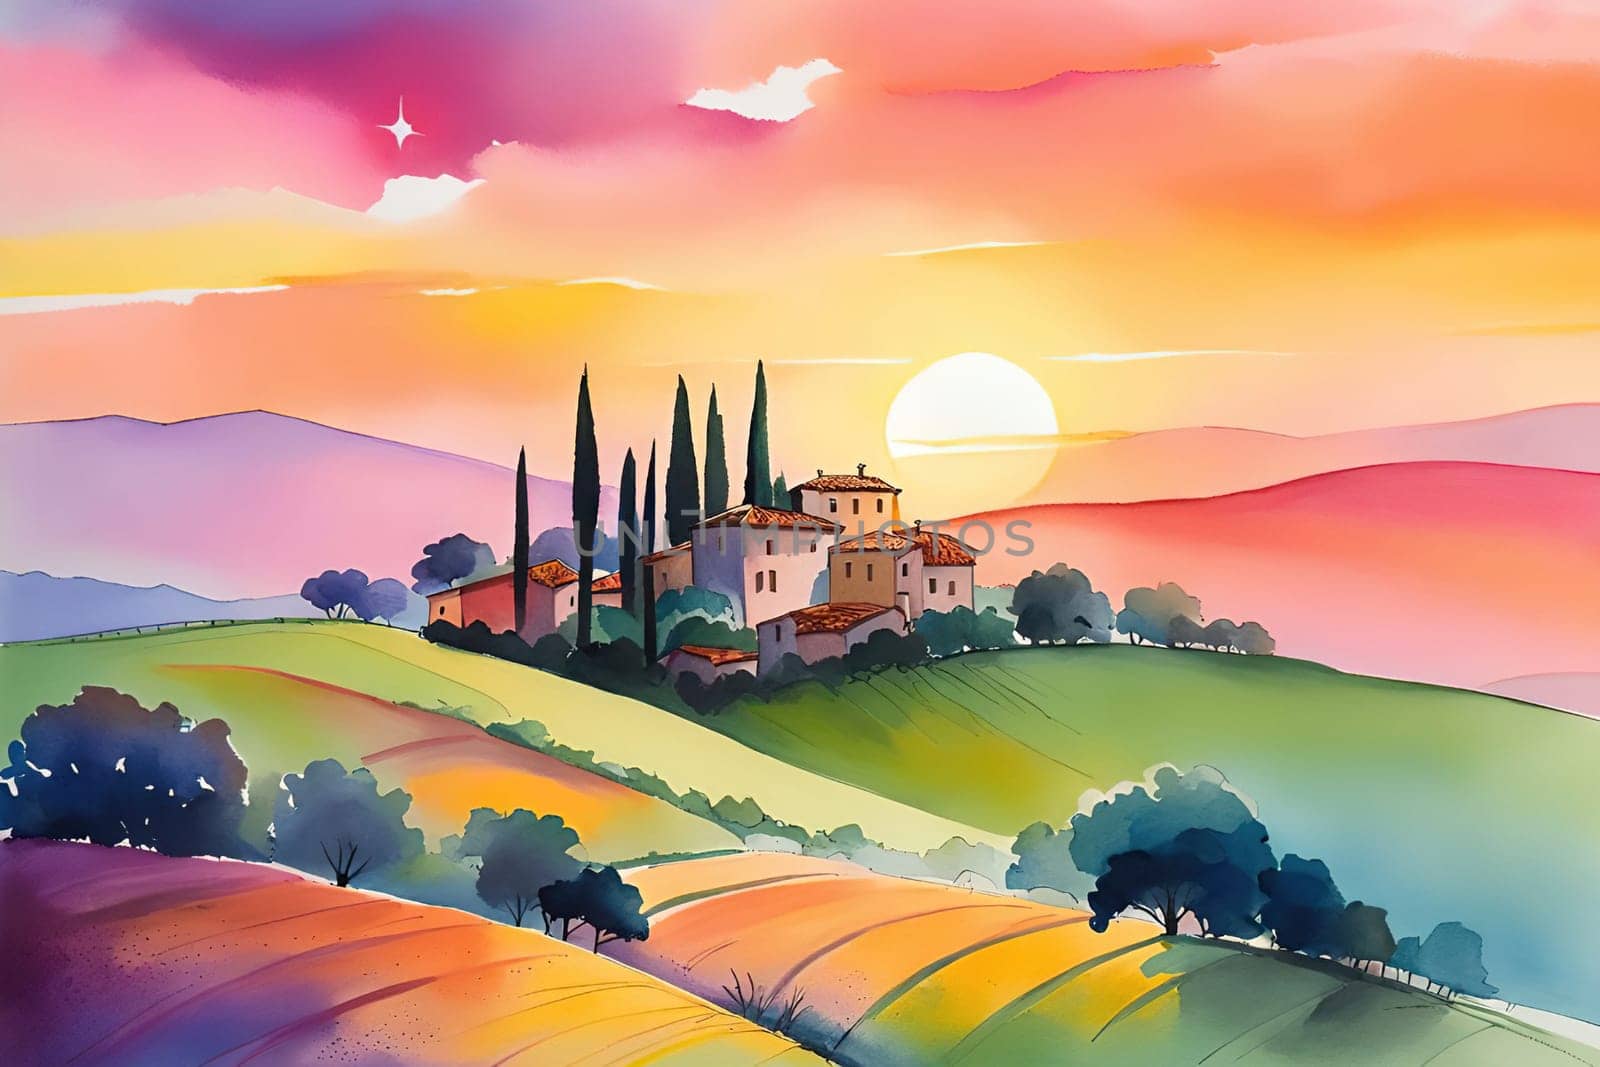 Tuscany landscape with sun, hills and village. Vector illustration. Tuscany landscape at sunset. Italy, Europe.